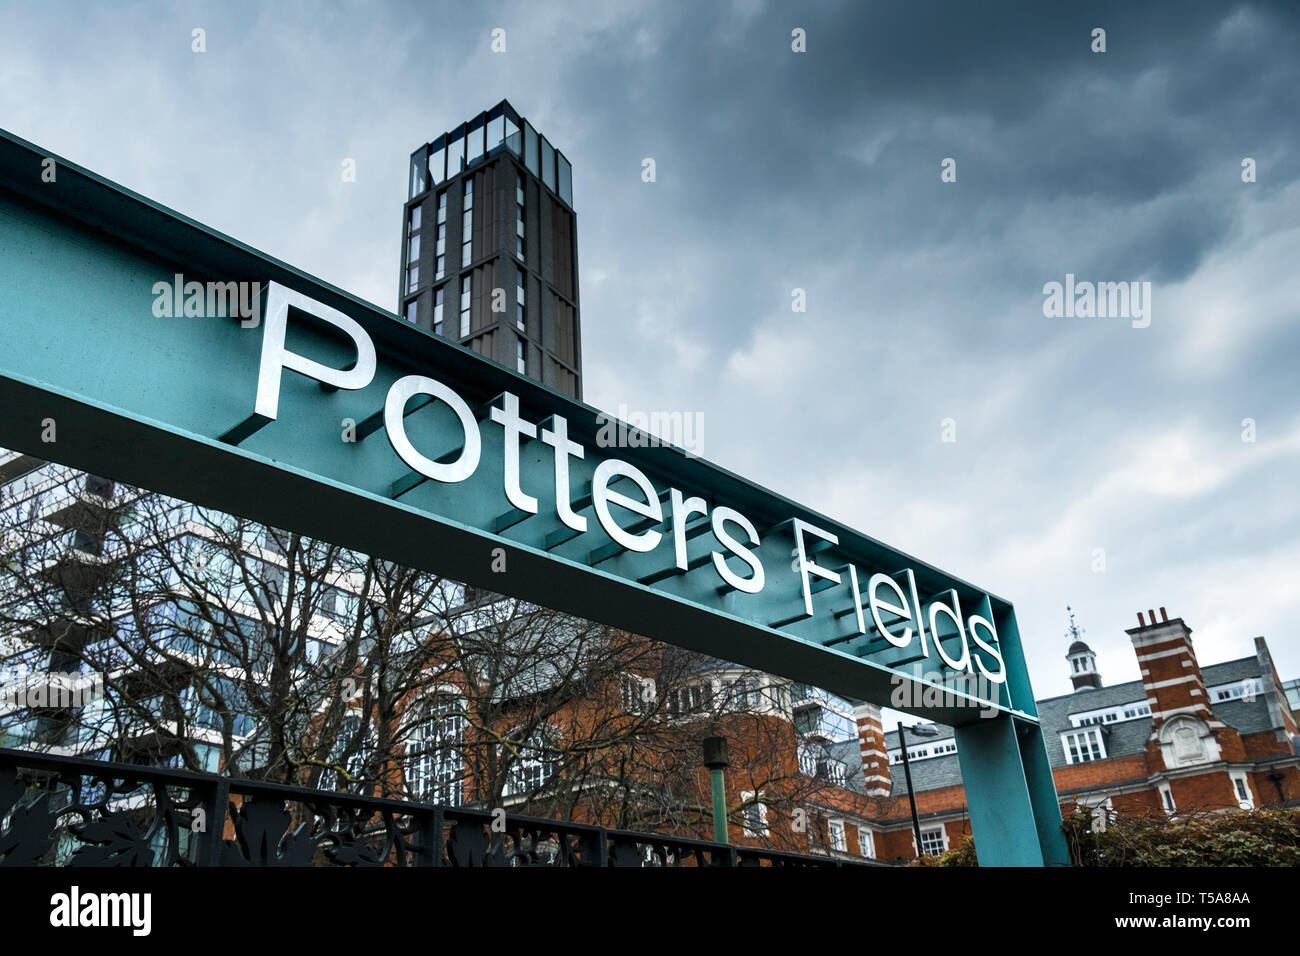 The metal sign above an entrance to Potters Fields in London. Stock Photo